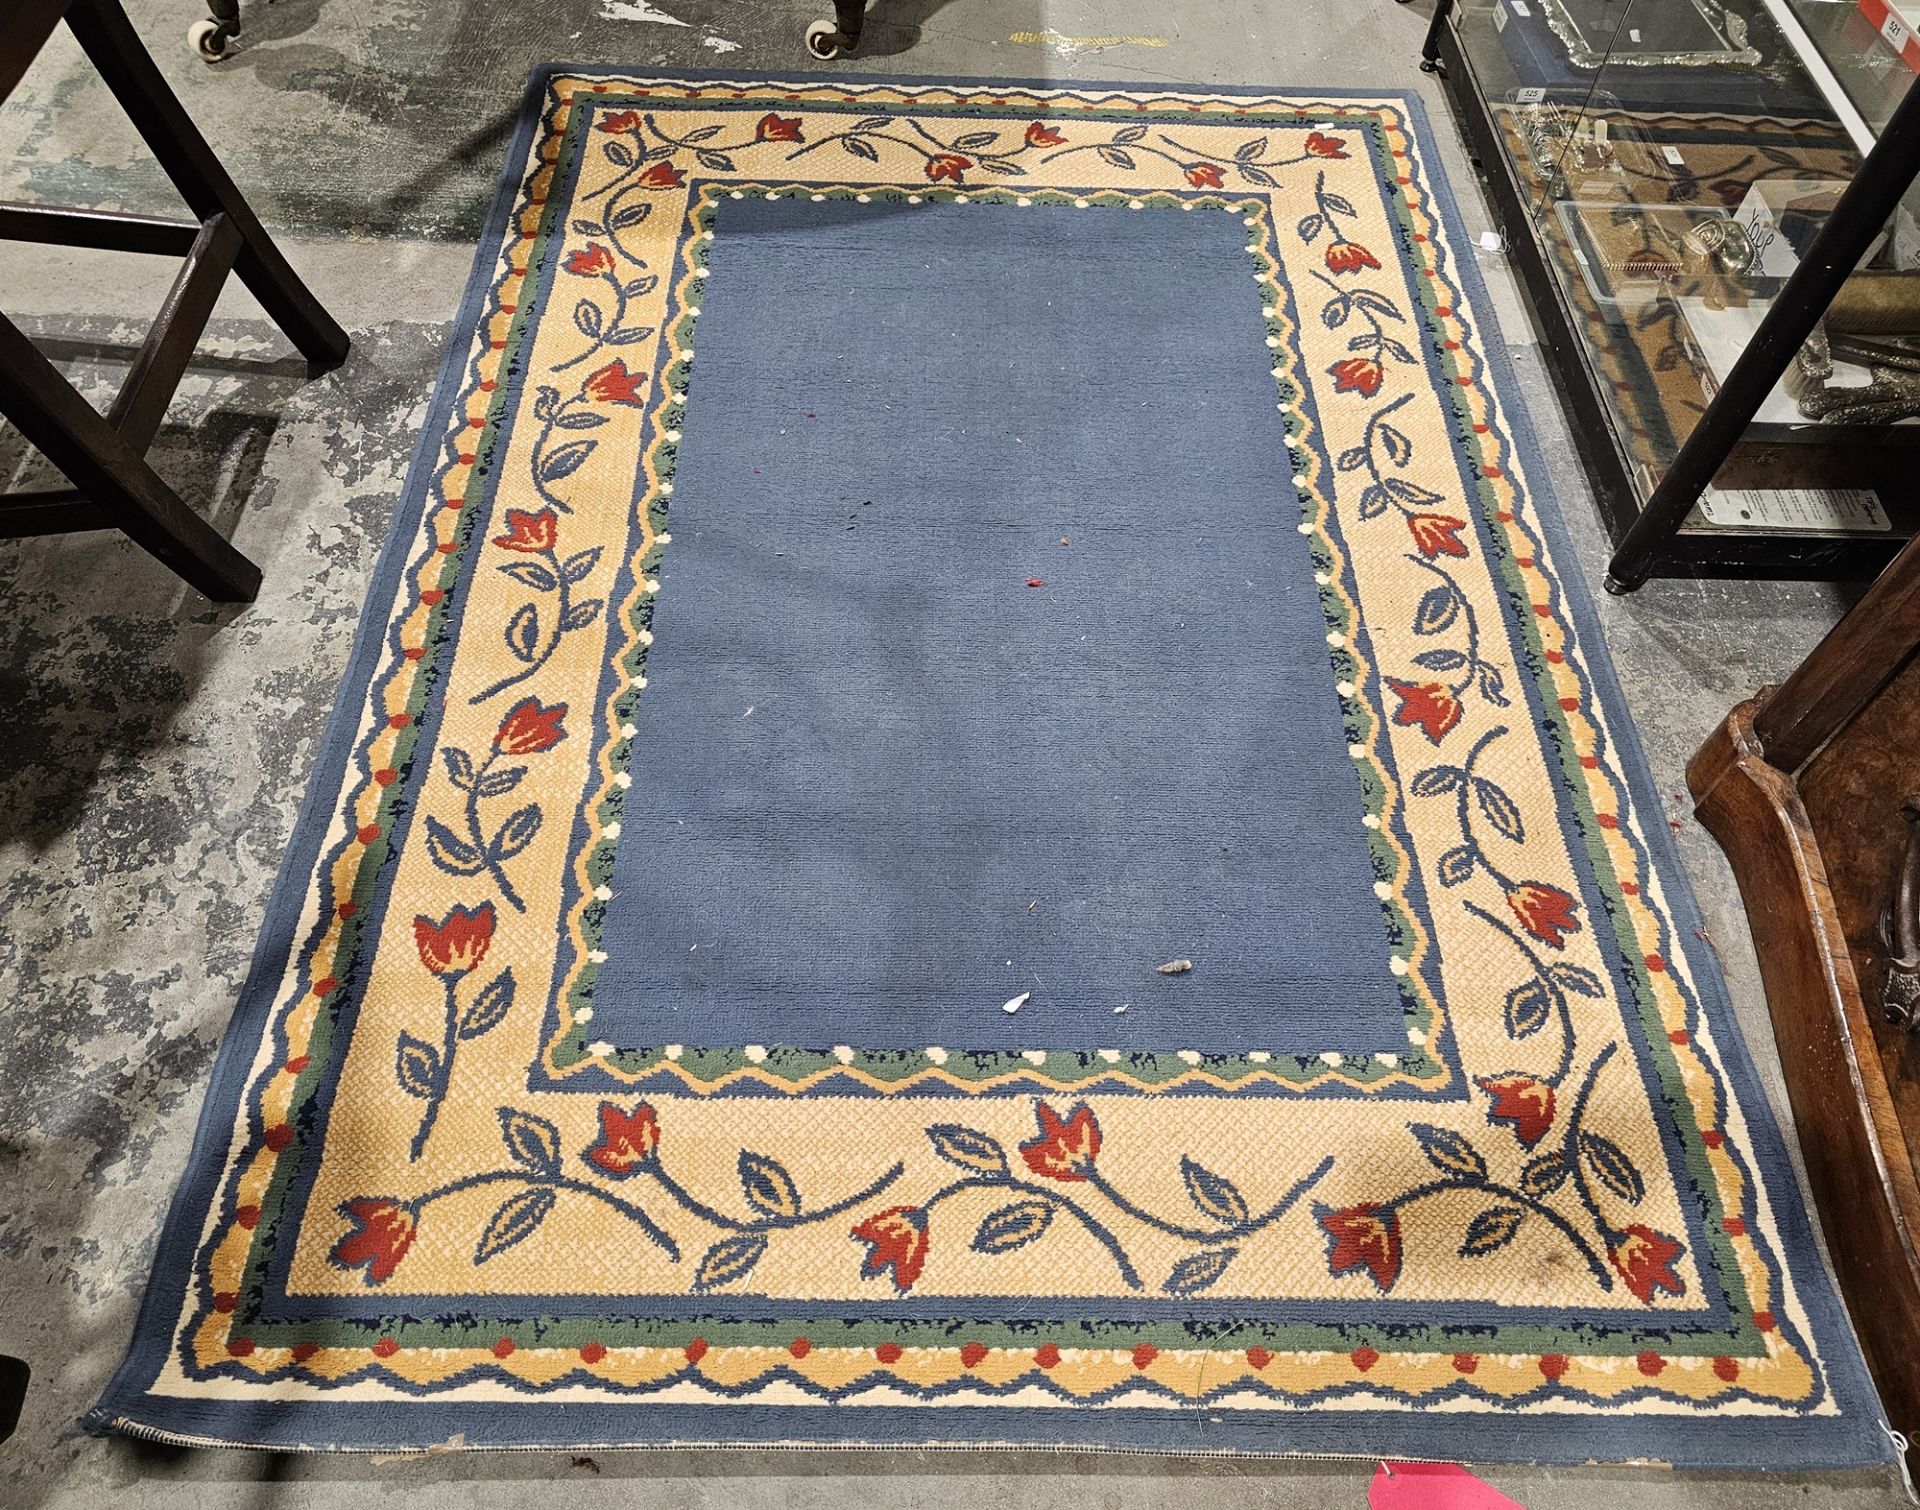 Modern blue ground rug with plain blue field, single floral and geometric borders, 170cm x 120cm